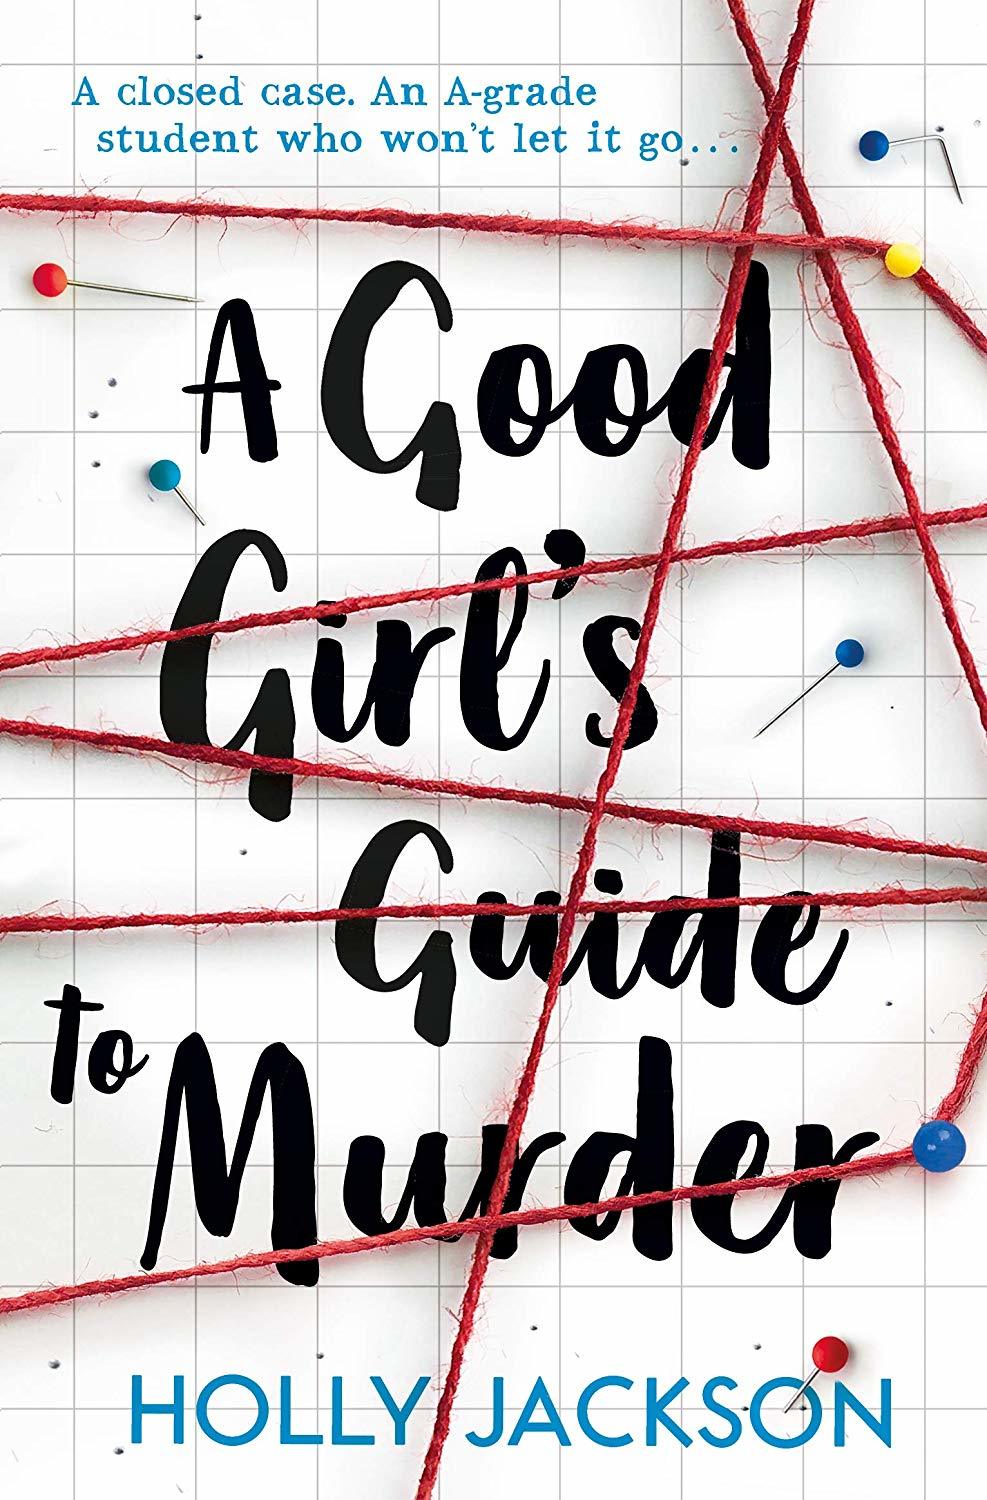 Holly Jackson: Good Girl's Guide to Murder (2019, Egmont Books, Limited)